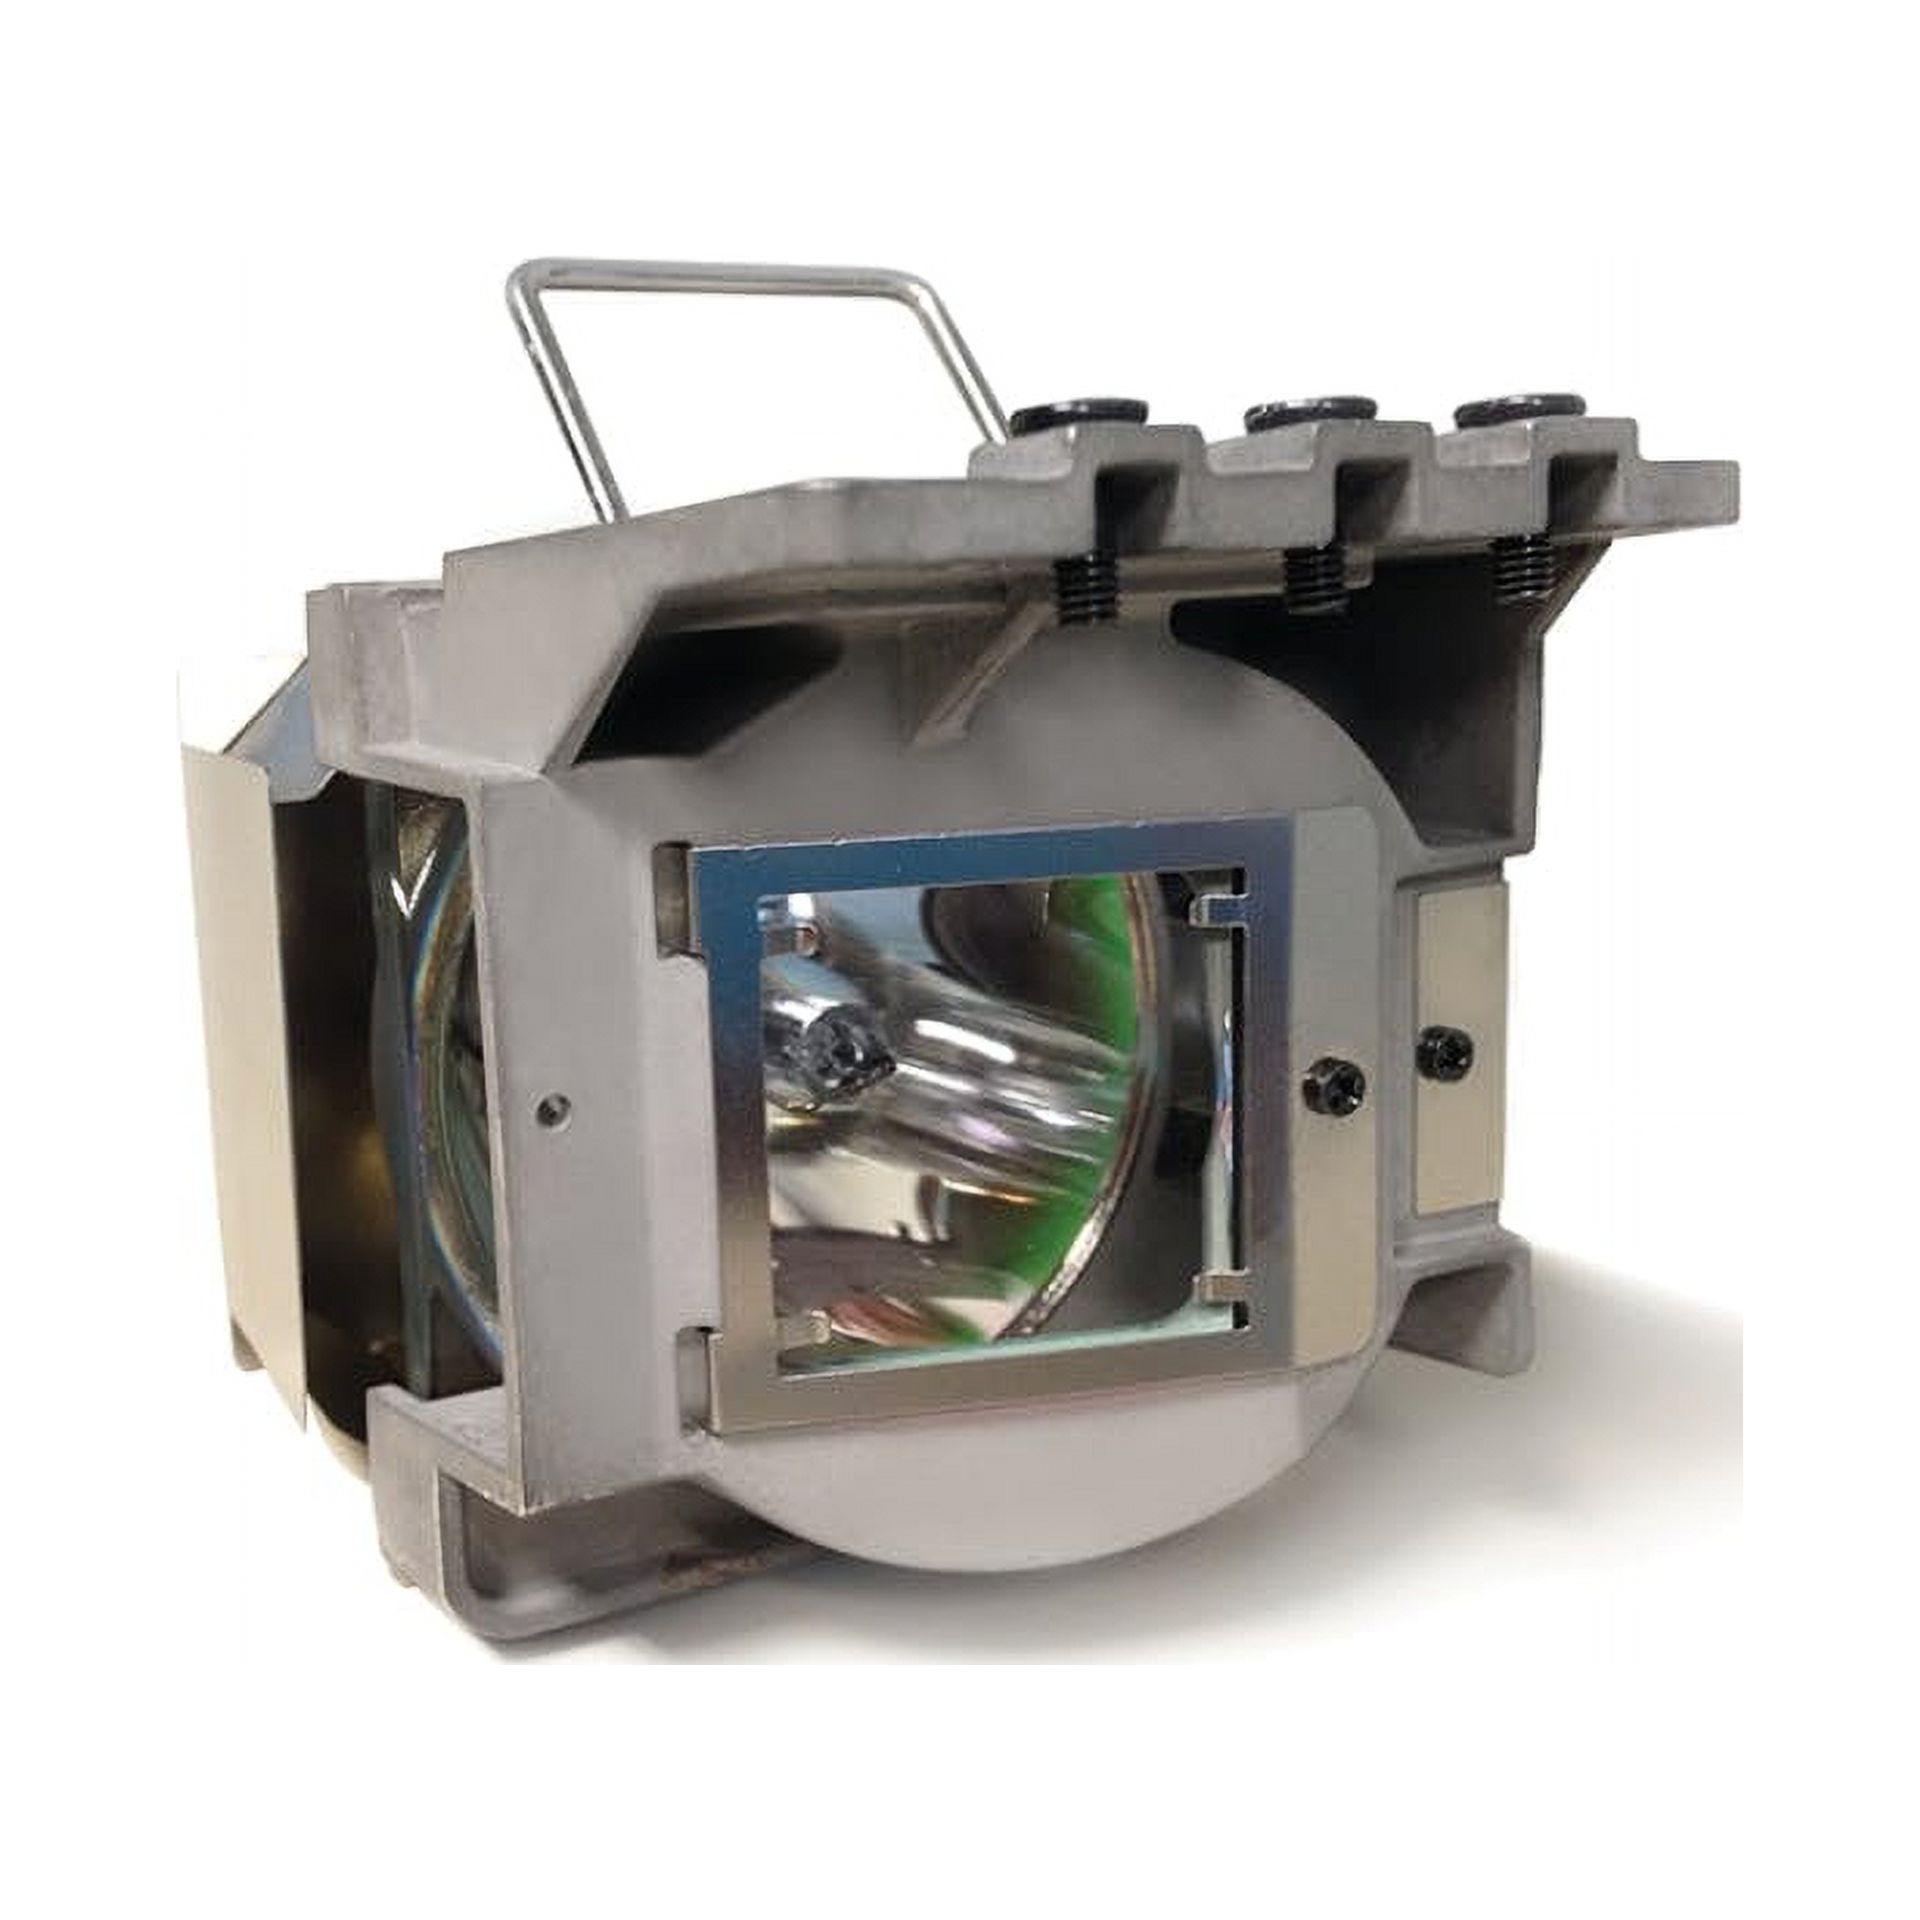 Infocus Replacement Projector Lamp for the IN1116 and IN1118HD - image 1 of 2